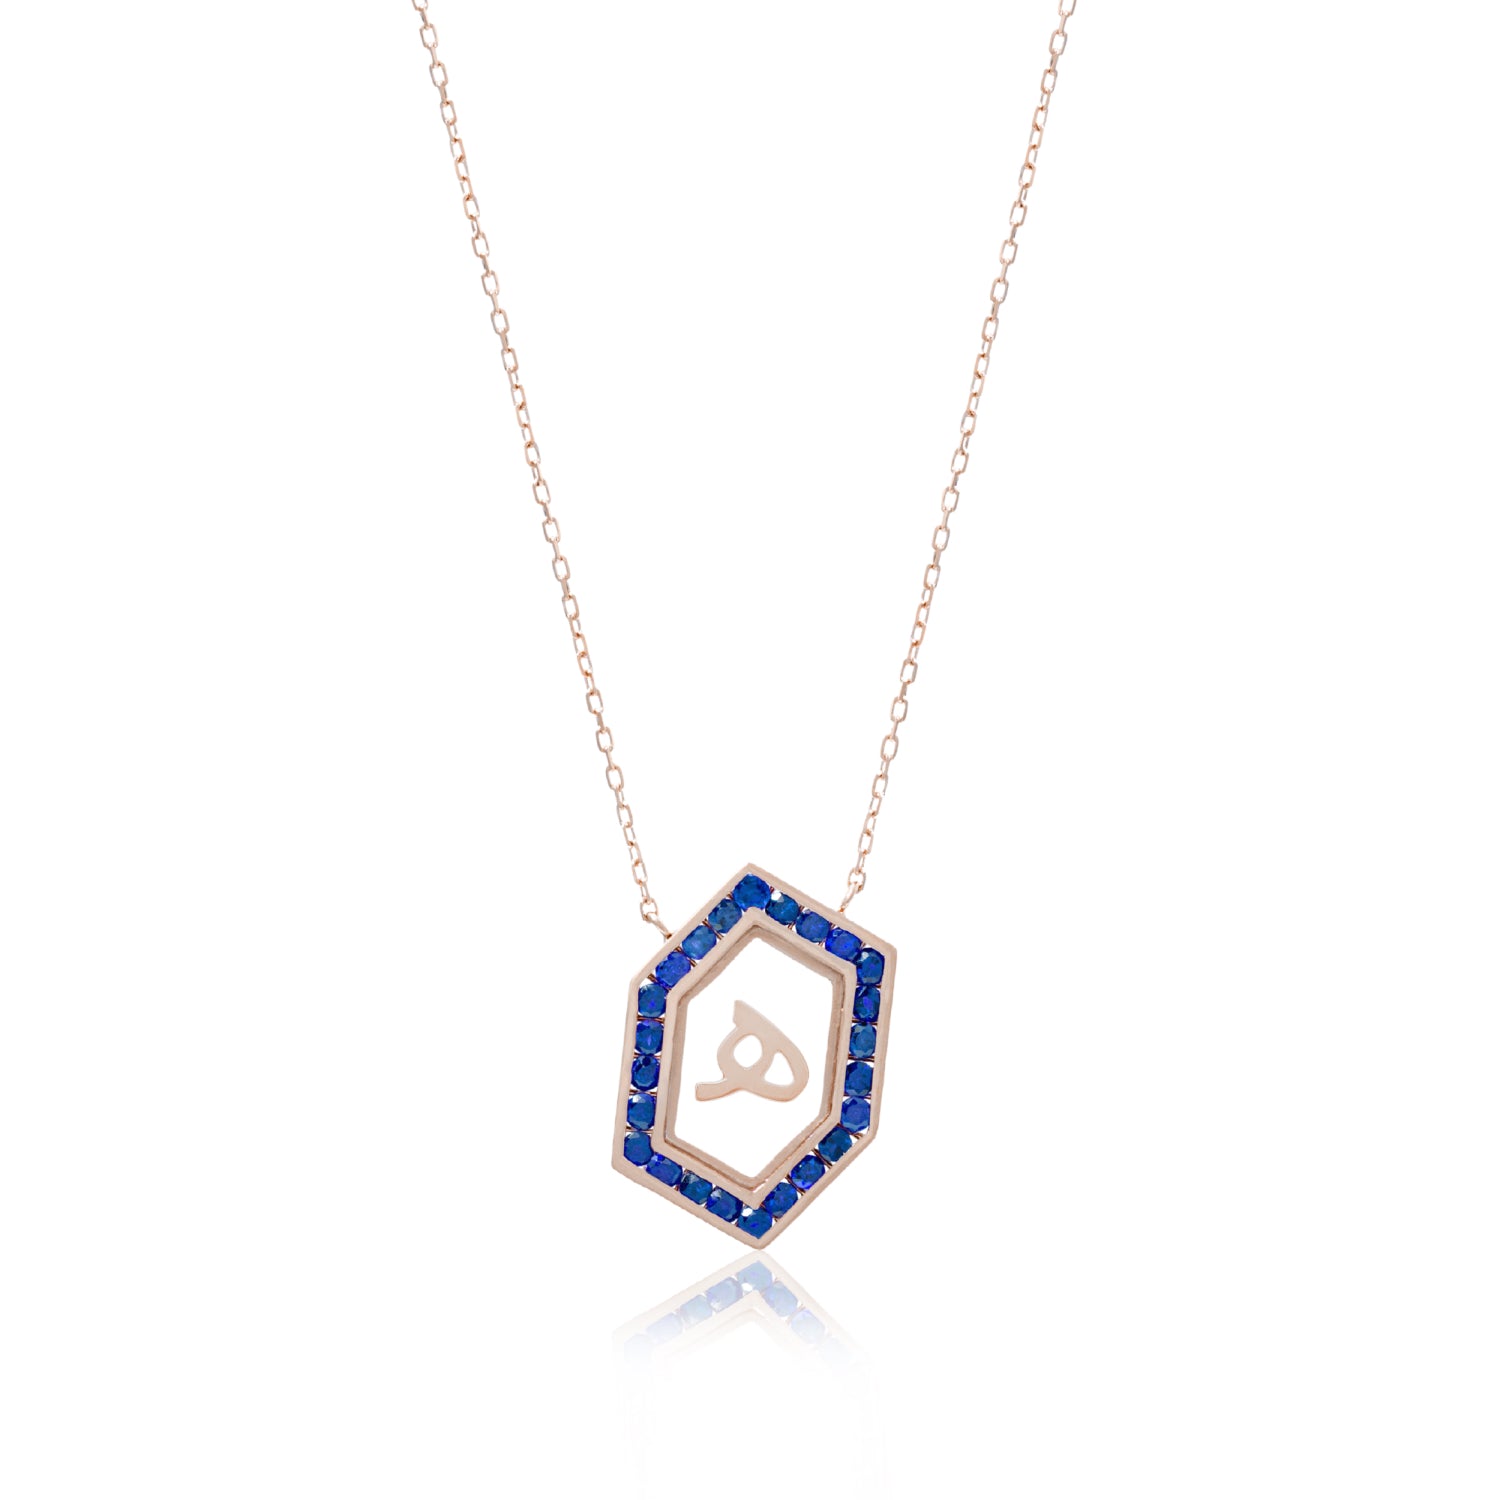 Qamoos 1.0 Letter هـ Sapphire Necklace in Rose Gold